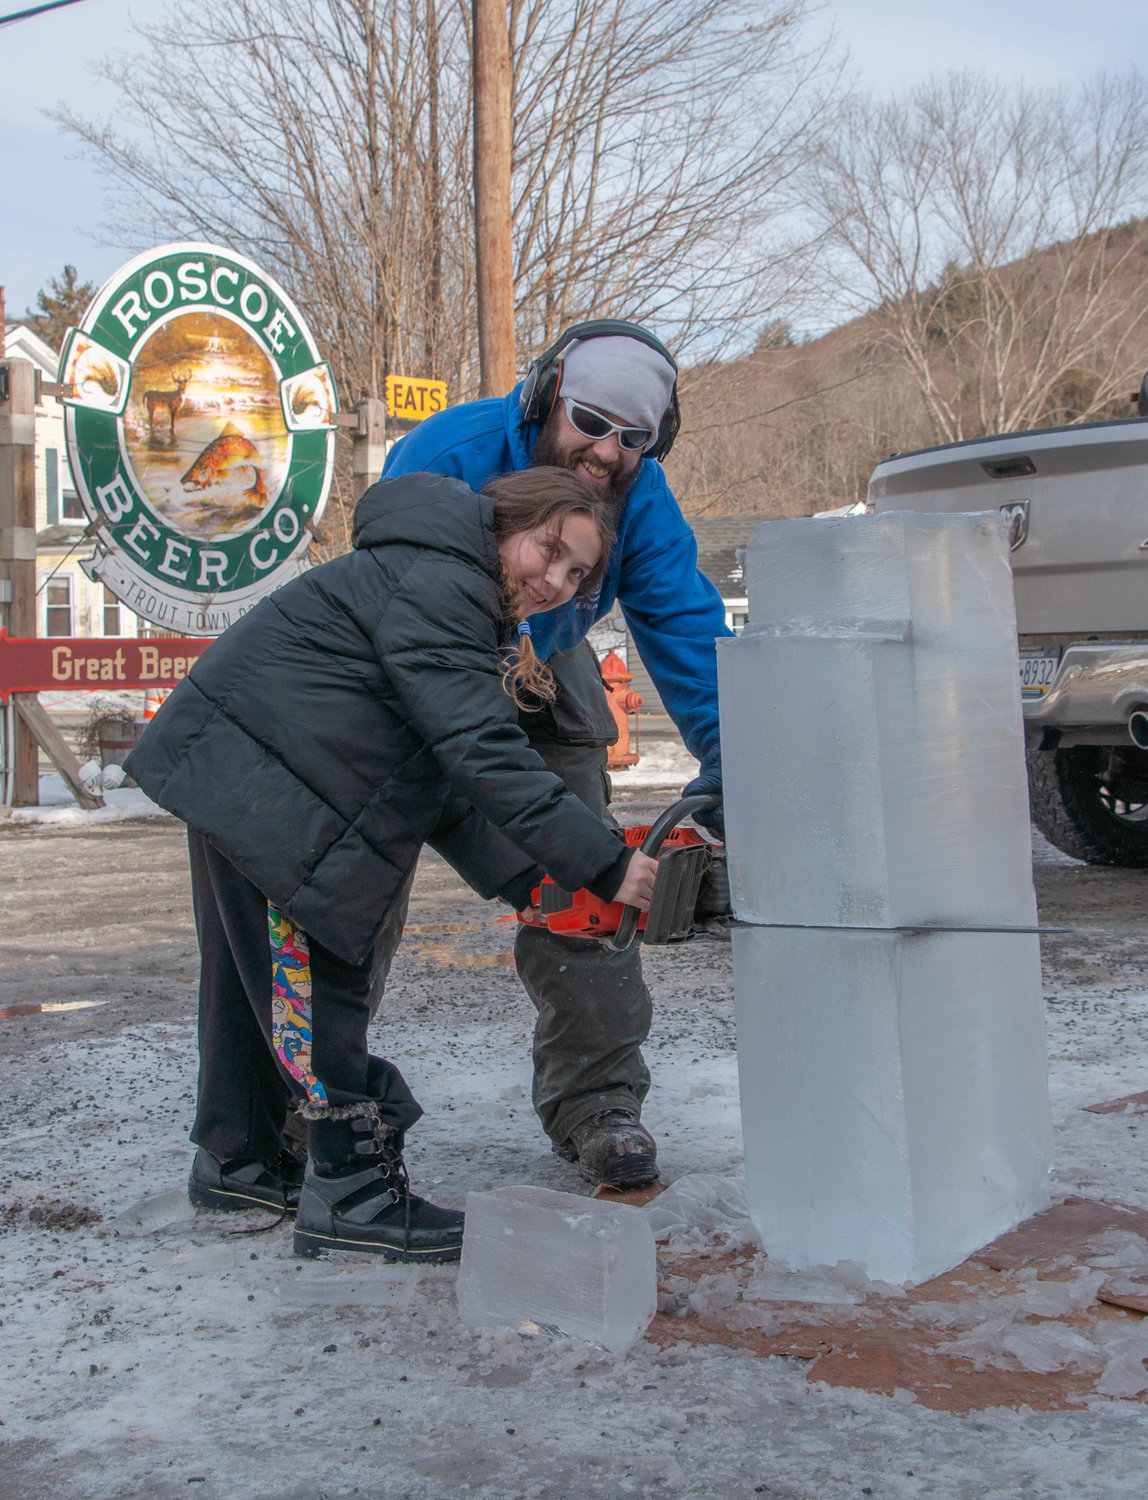 Stump Devil Jake Polick was teaching nine-year-old daughter Jocelyn the tricks of the trade during the 2023 Roscoe Beer WinterFest ice carving demo last weekend.